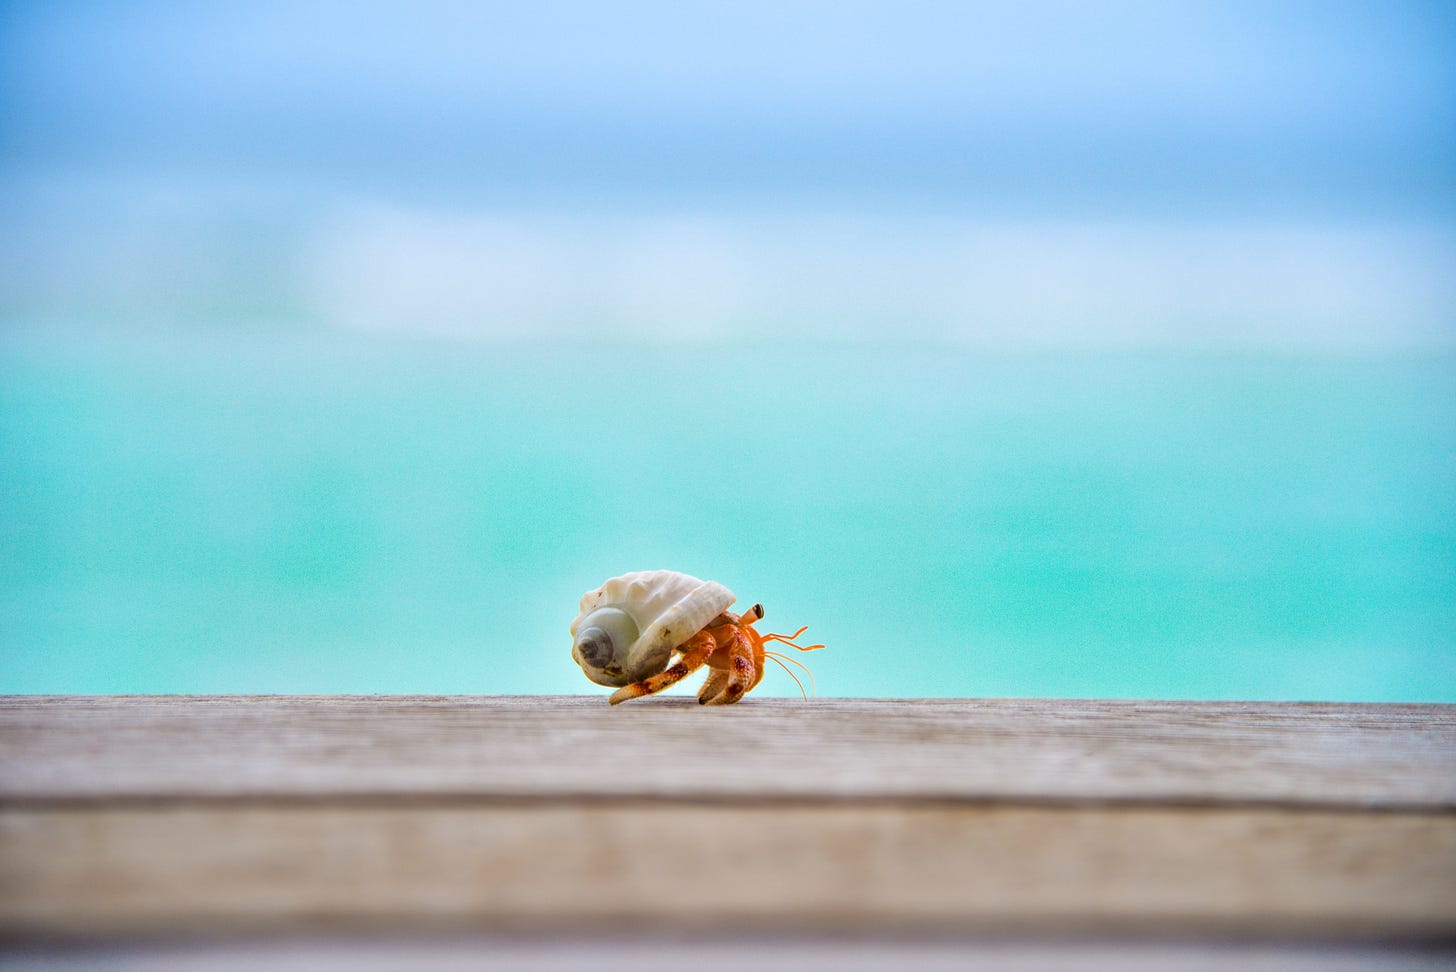 Photograph of a very cute hermit crab walking along a wooden boardwalk with the sea and sky in the background.